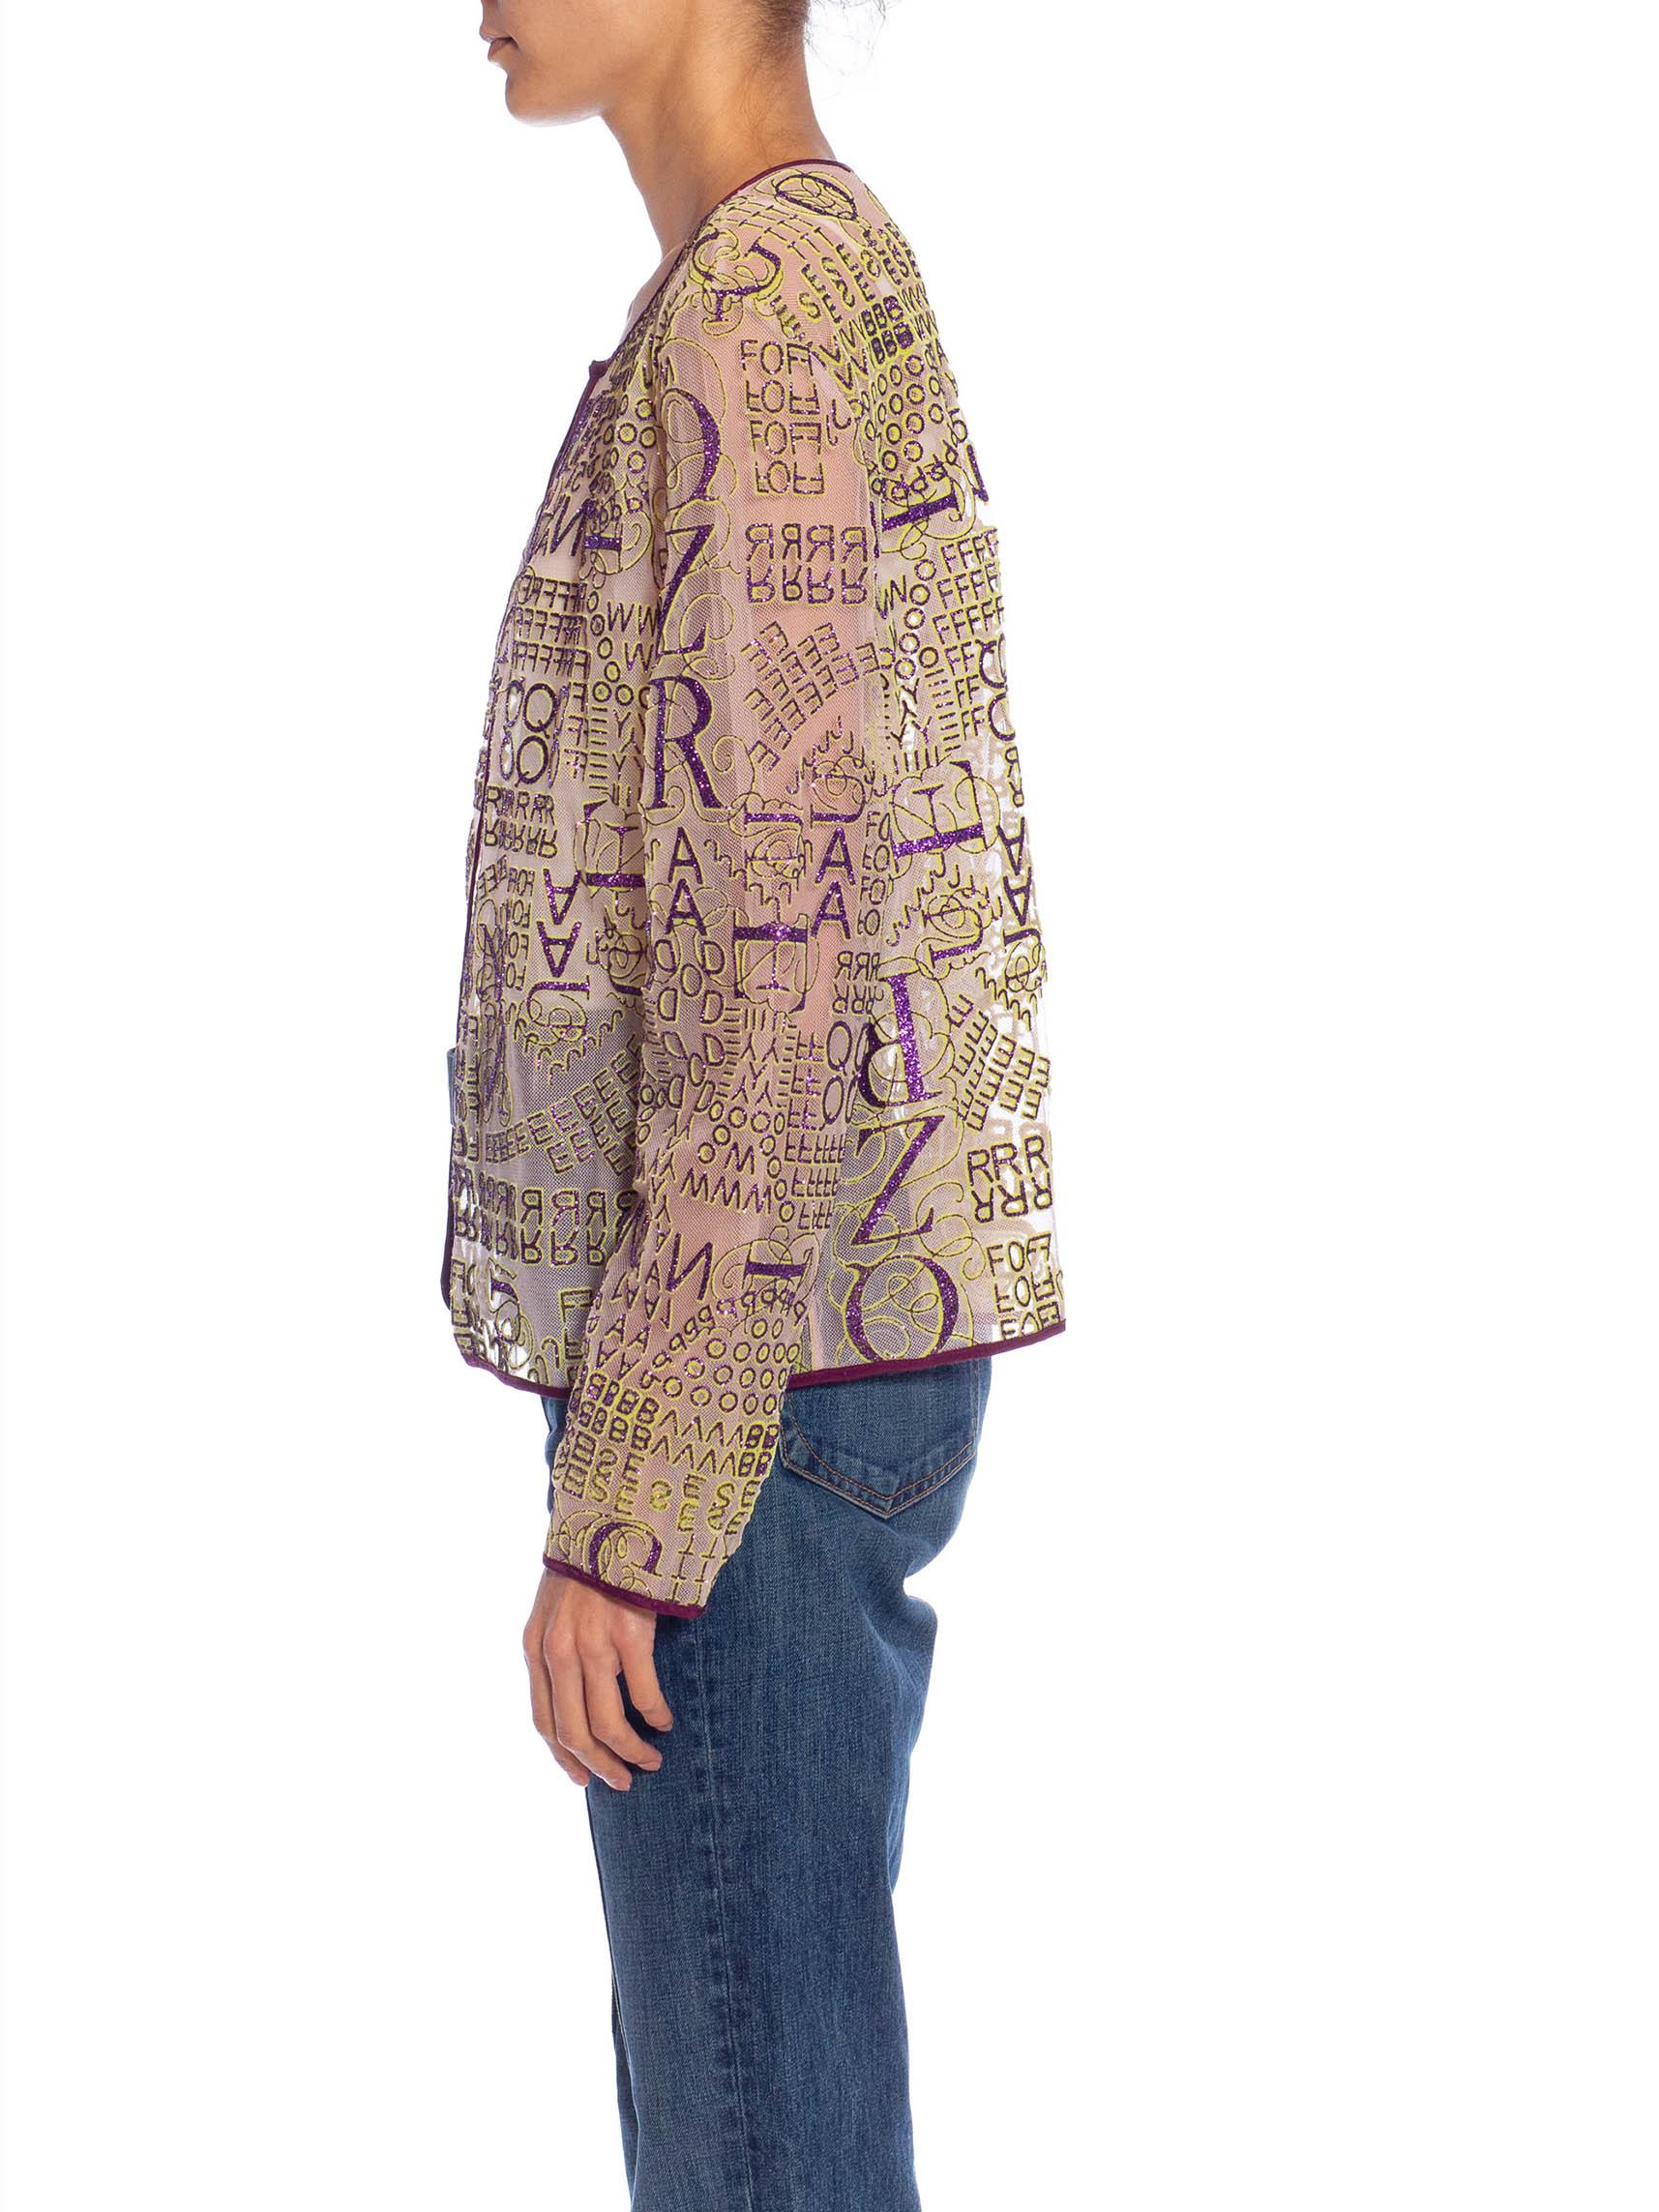 2010S MARY KATRANTZOU Lilac Poly/Rayon/Nylon Glitter Graffiti Printed Jacket In Excellent Condition For Sale In New York, NY